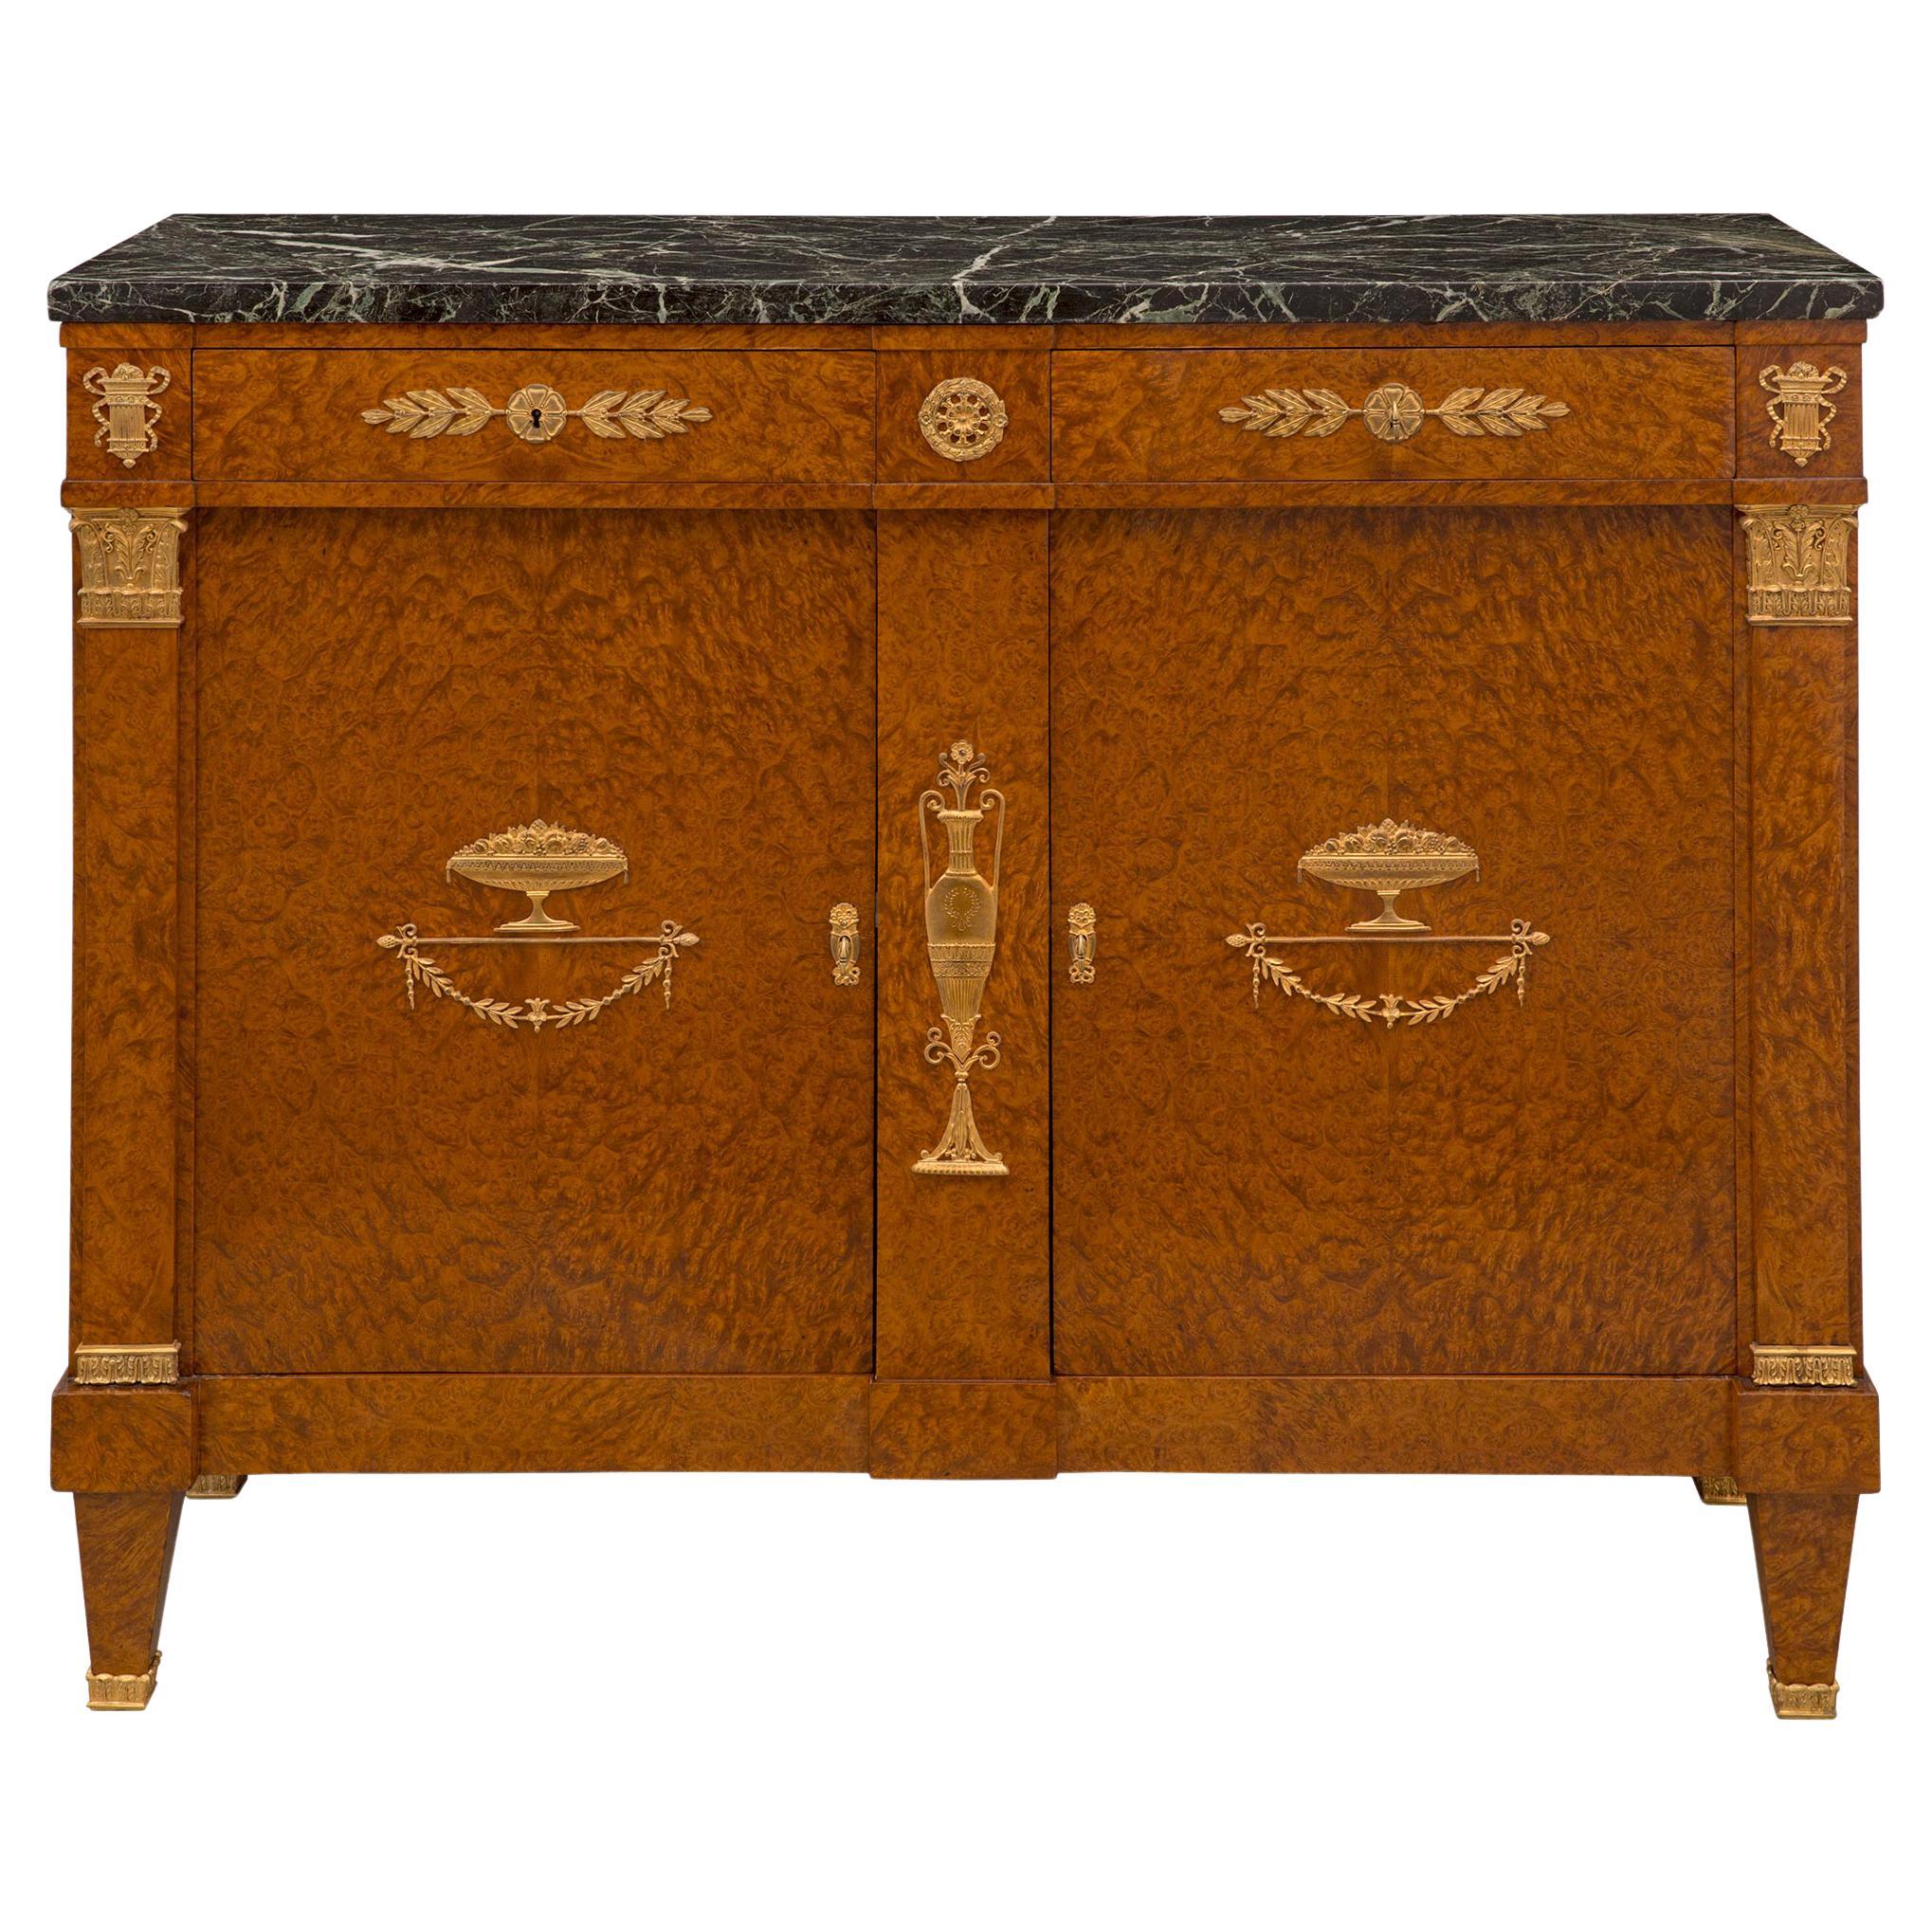 French 19th Century Neoclassical Style Walnut and Ormolu Two-Door/Drawer Buffet